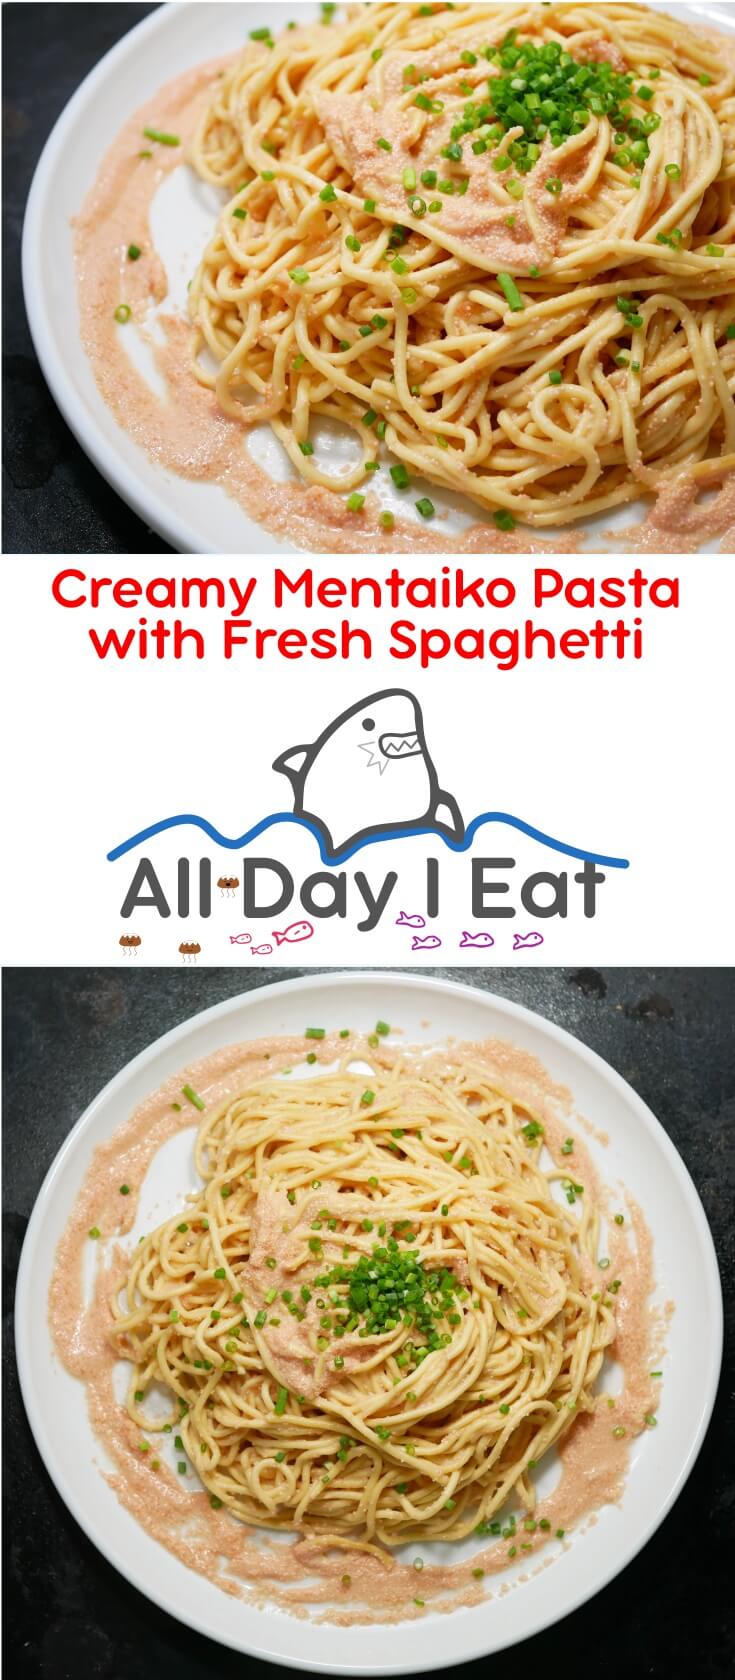 Creamy Mentaiko Pasta with fresh spaghetti. This is creamy and rich, yet it has no cream! Can you guess the secret ingredients?! | www.alldayieat.com